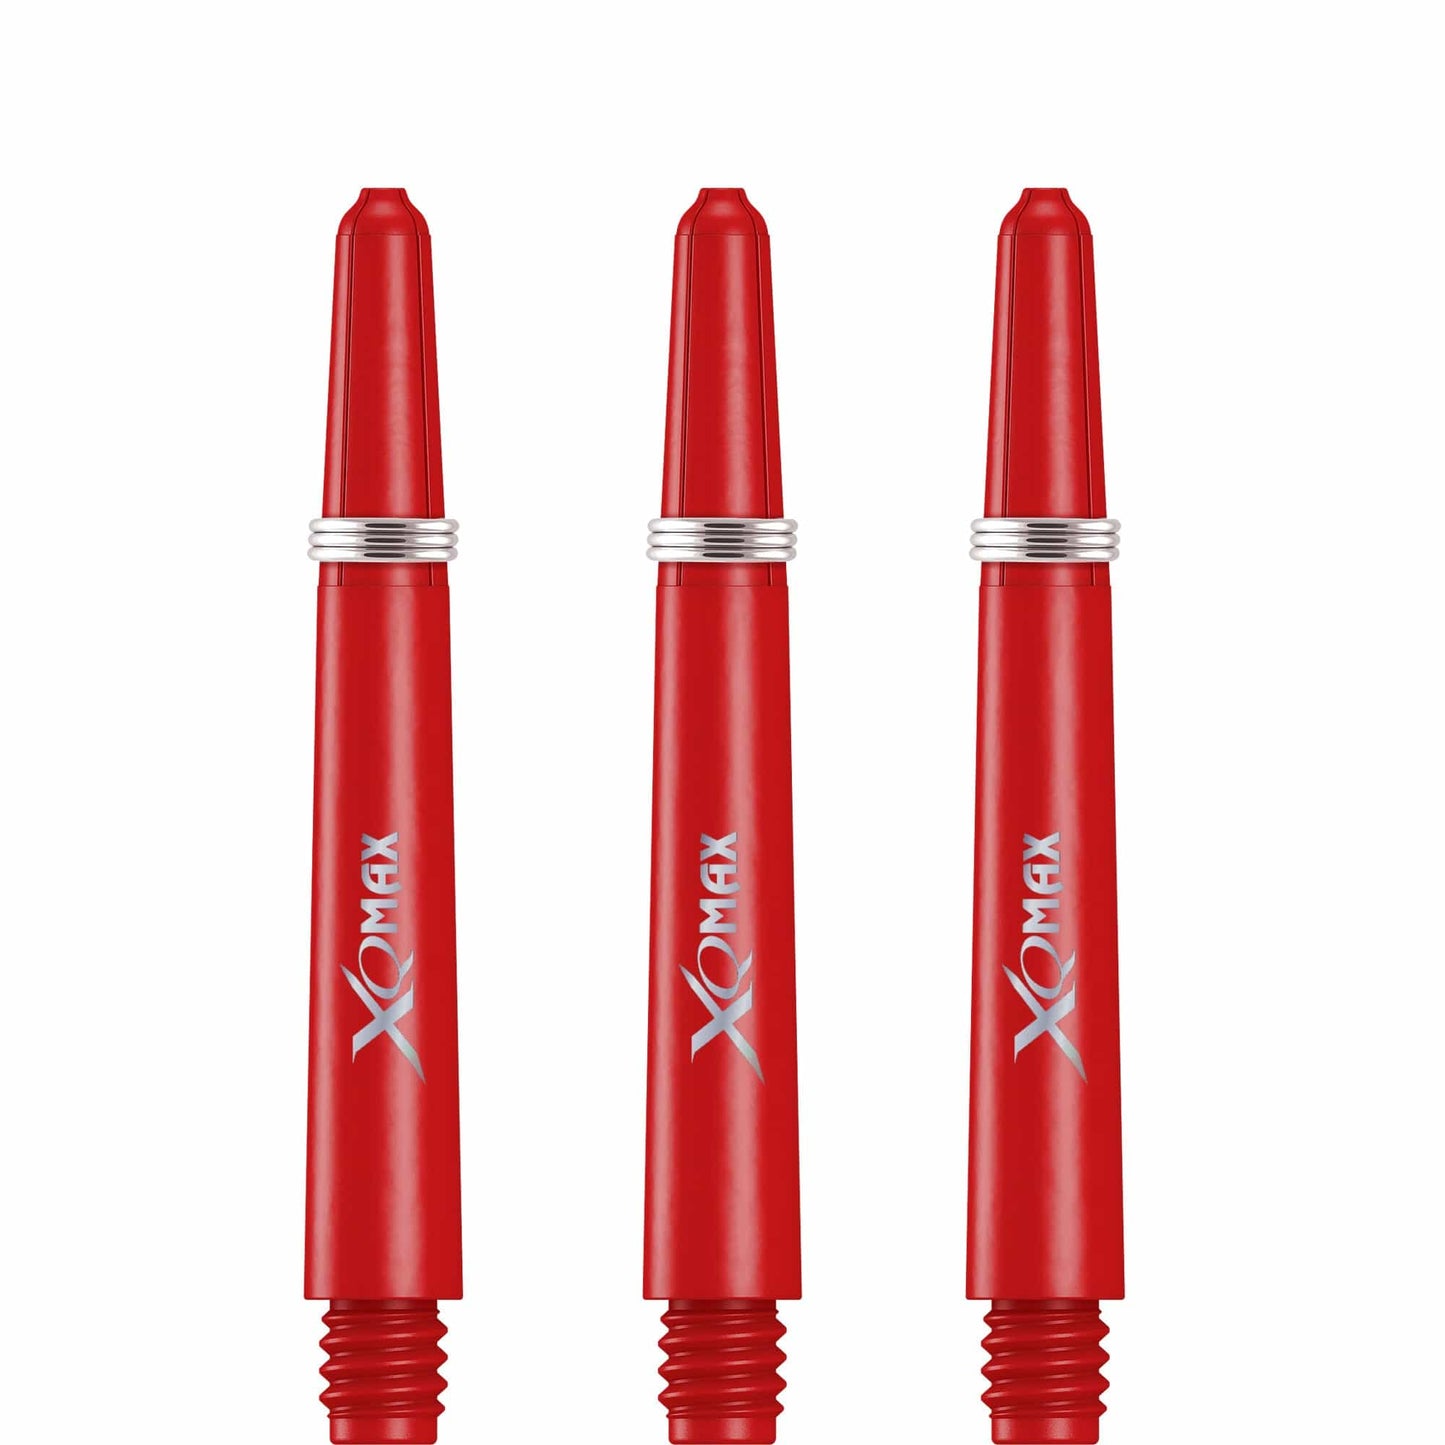 XQMax Polycarbonate Dart Shafts - Solid Colour with Logo - includes Springs - Red Tweenie